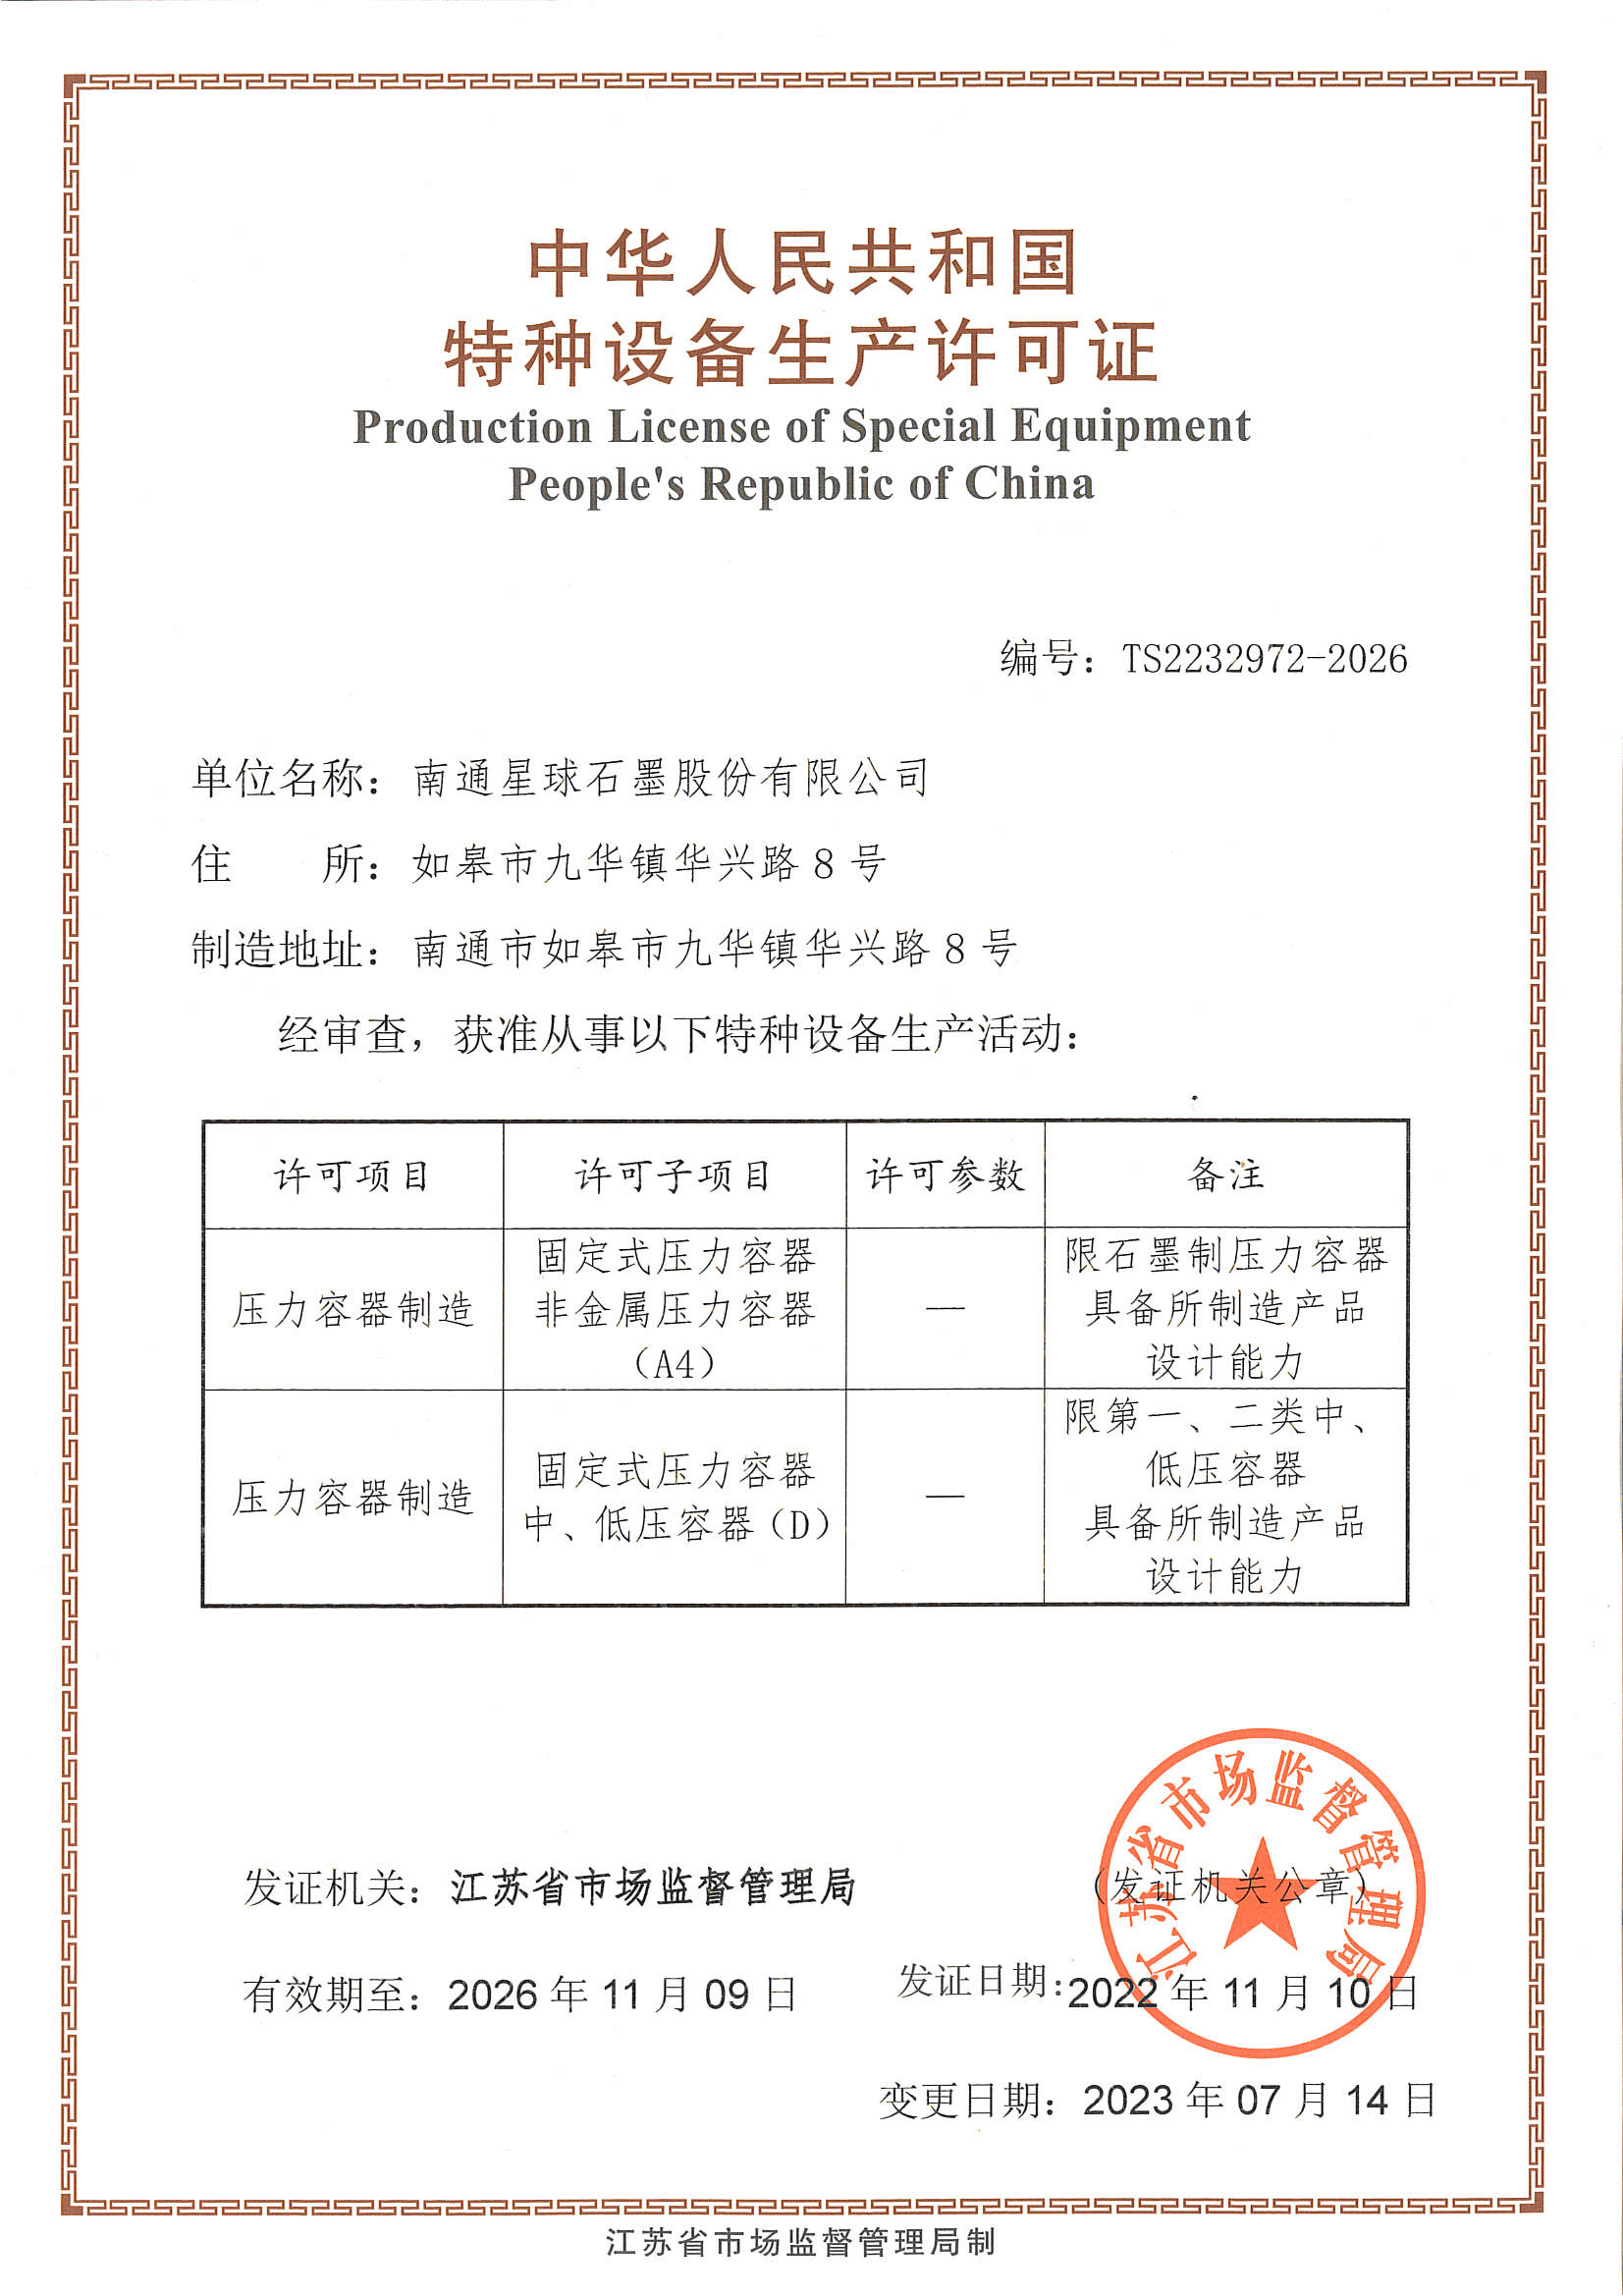 A4 D grade manufacture license of special equipment in 2023